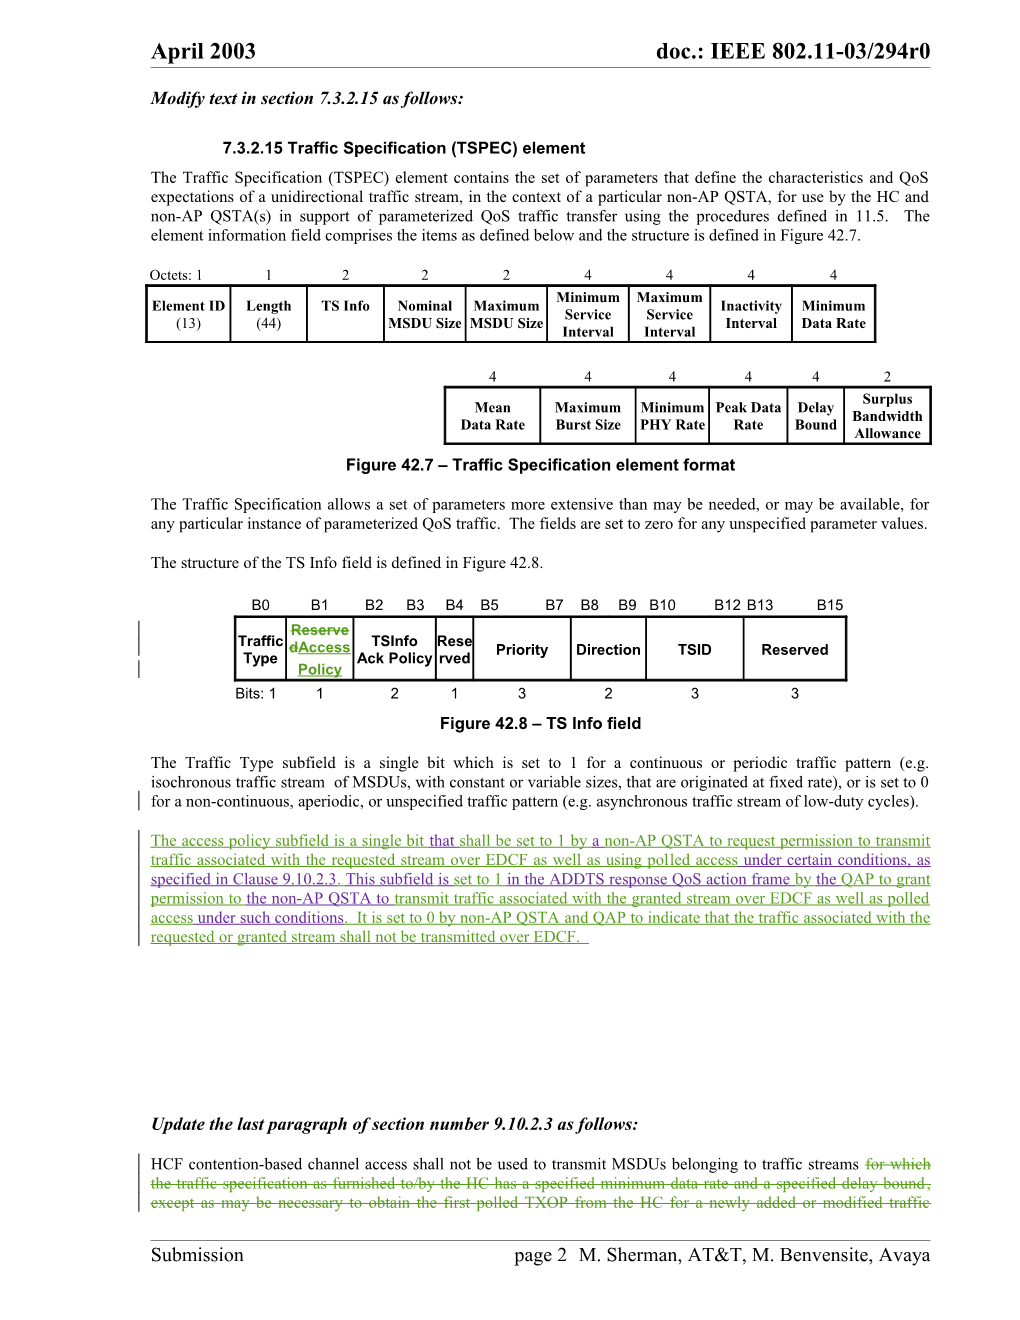 Proposed Normative Text for Transmission of Traffic Streams Using Contention Based Channel